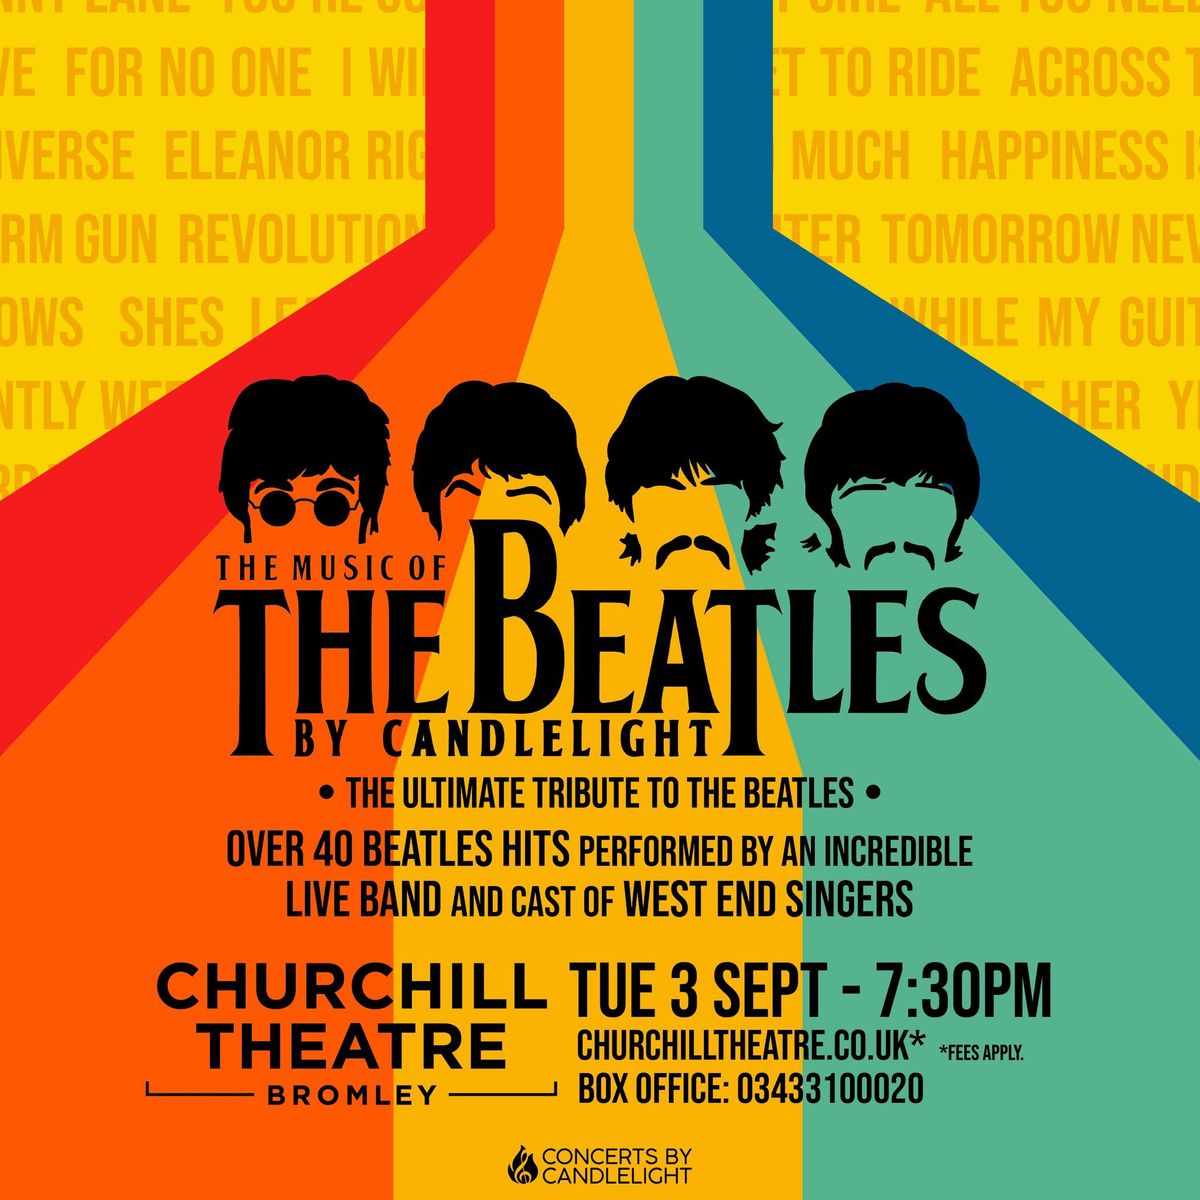 The Beatles By Candlelight At Churchill Theatre, Bromley